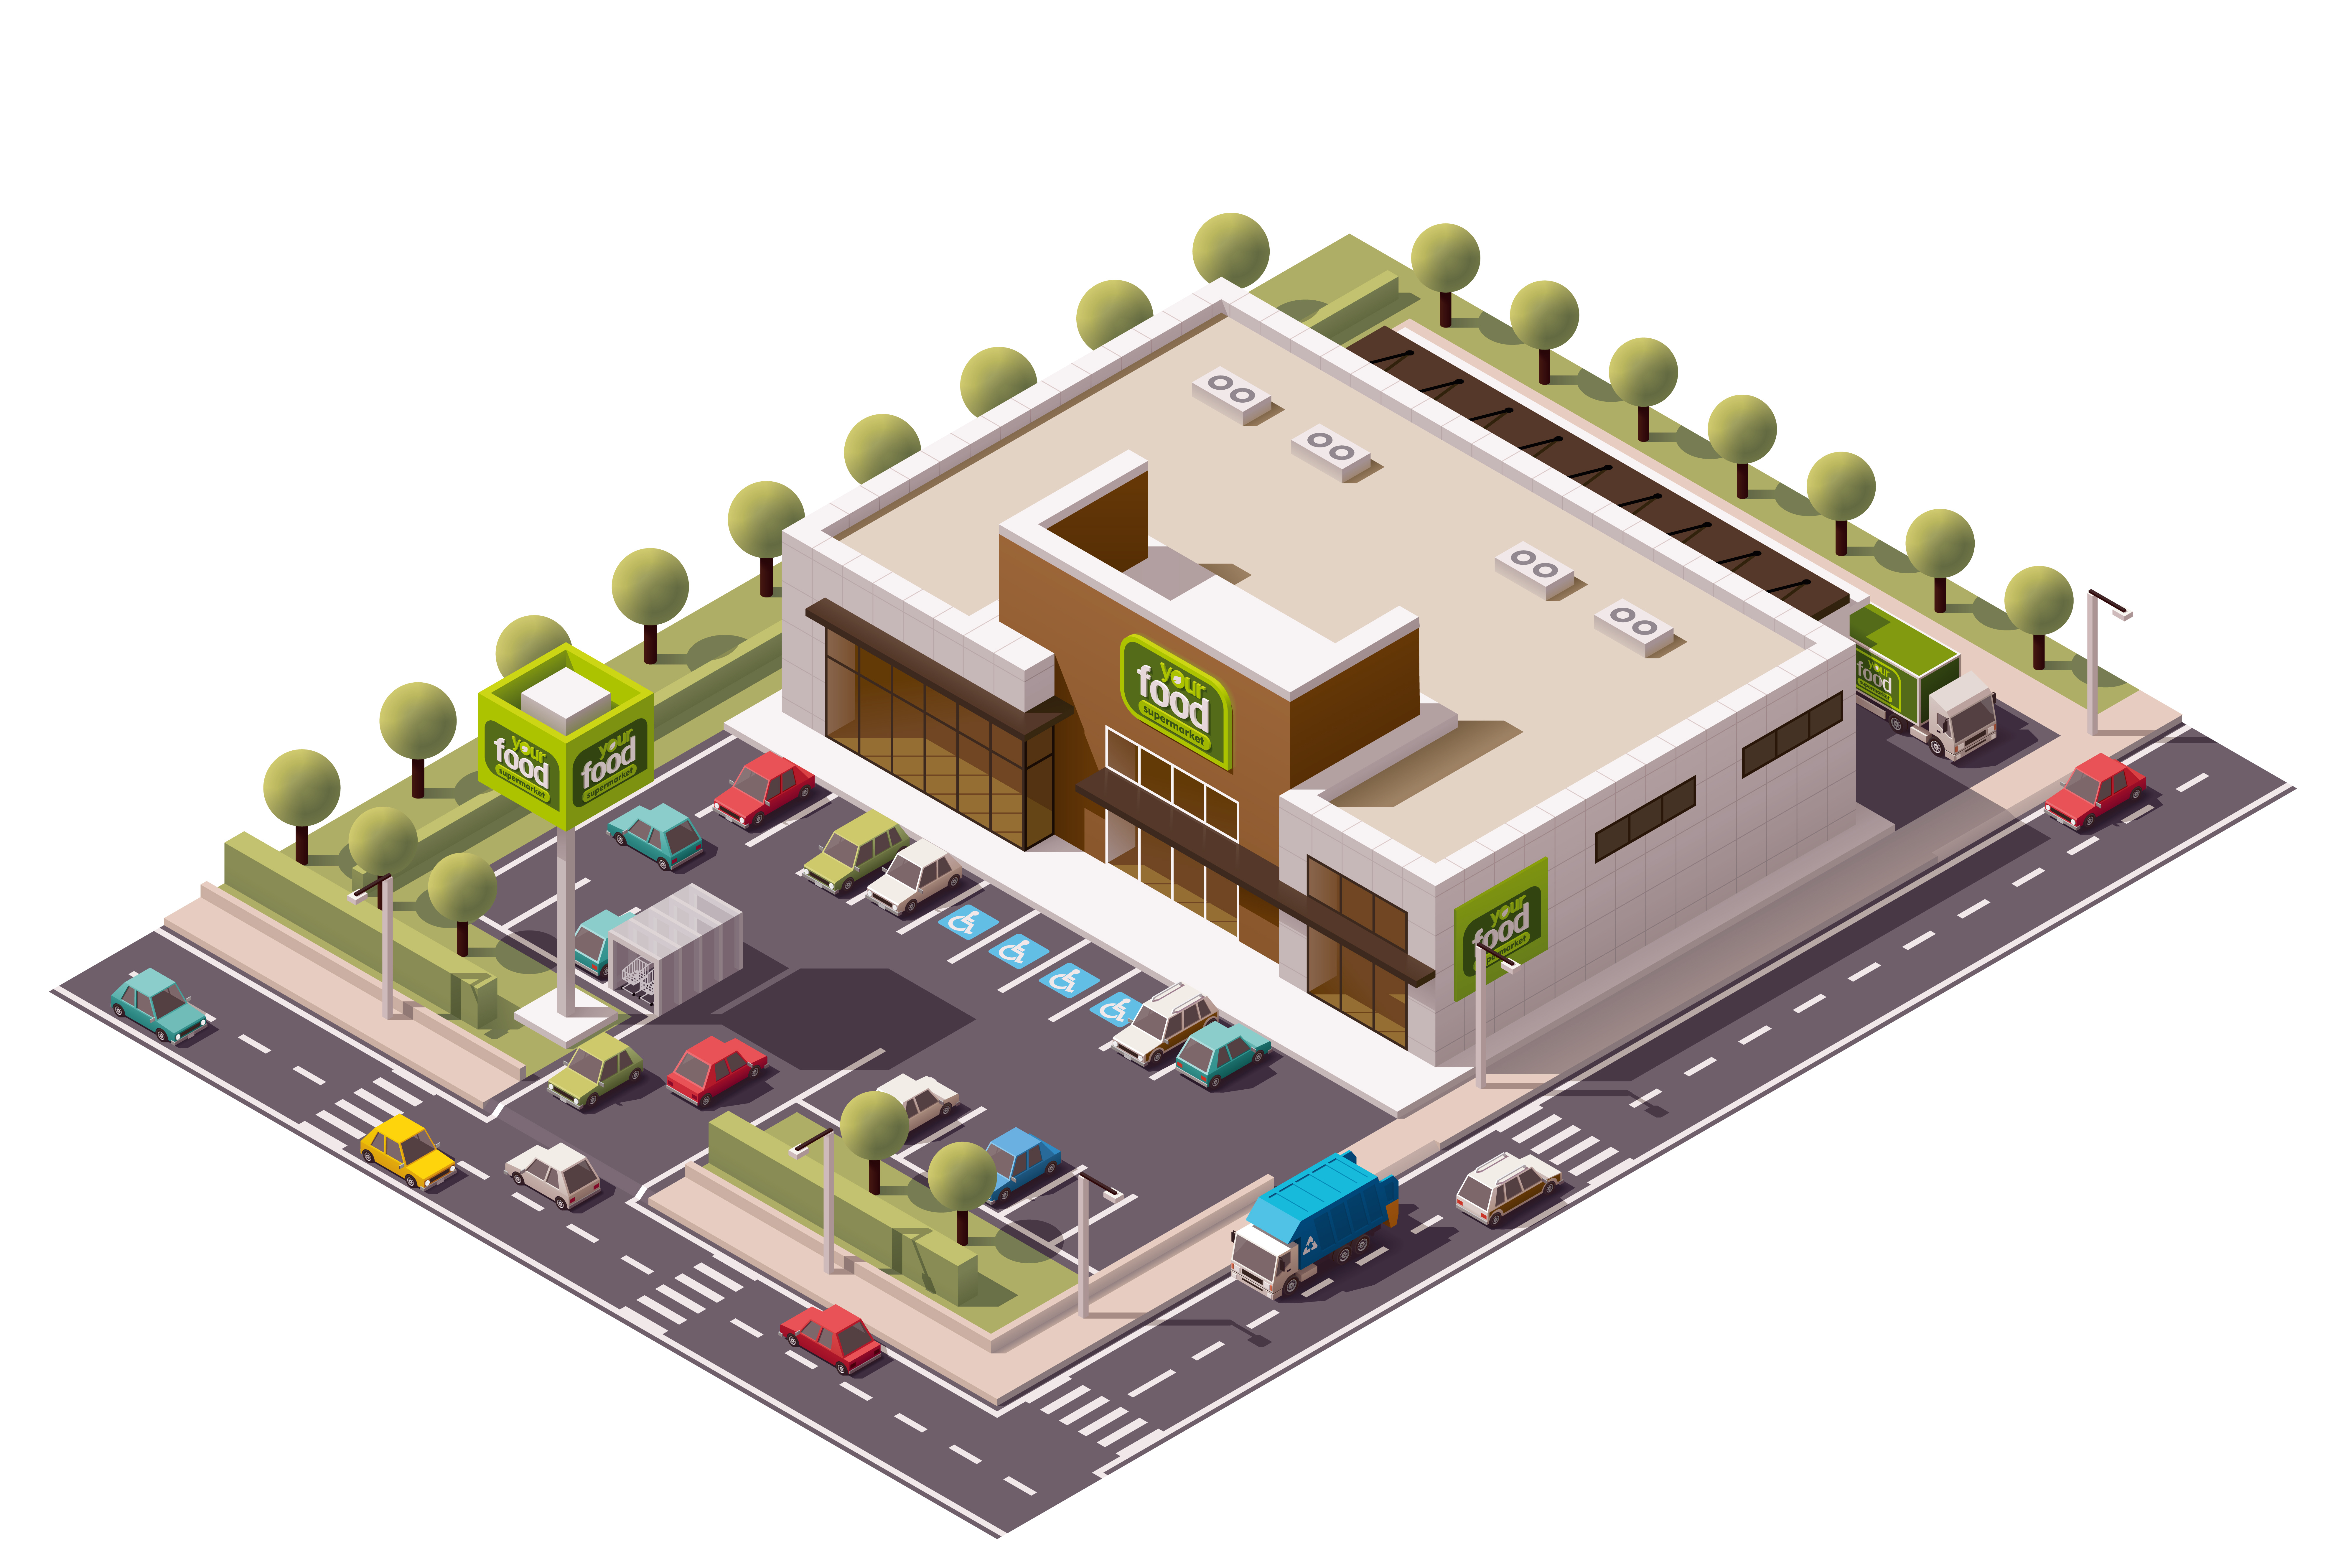 Trends in Food Retail | Worldlink Integration Group | Isometric grocery store vector illustration